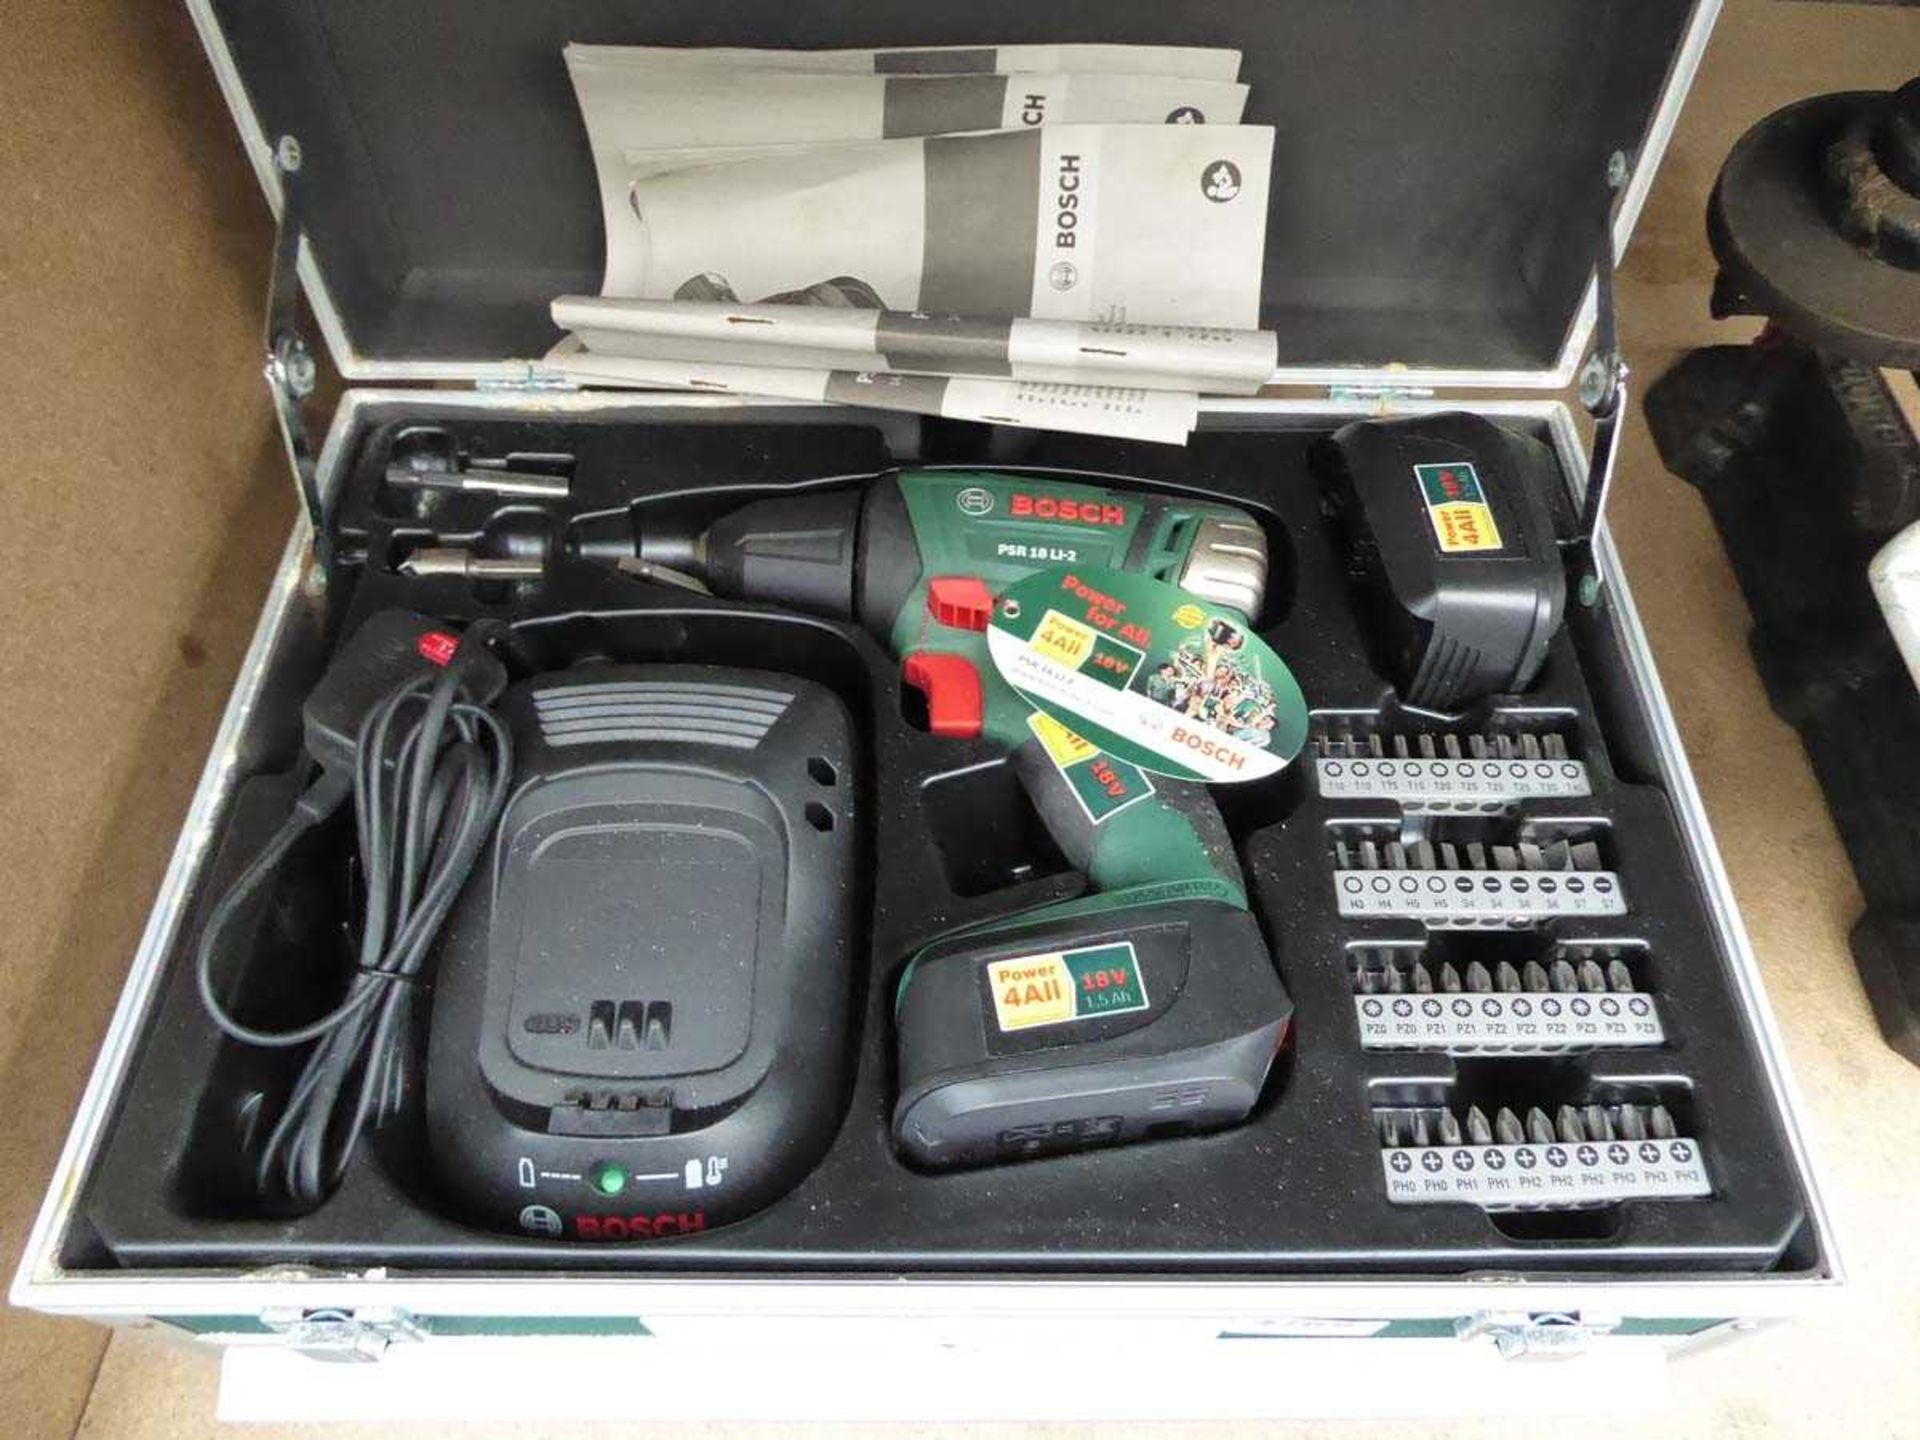 Bosch battery drill with 2 batteries, charger and bit set